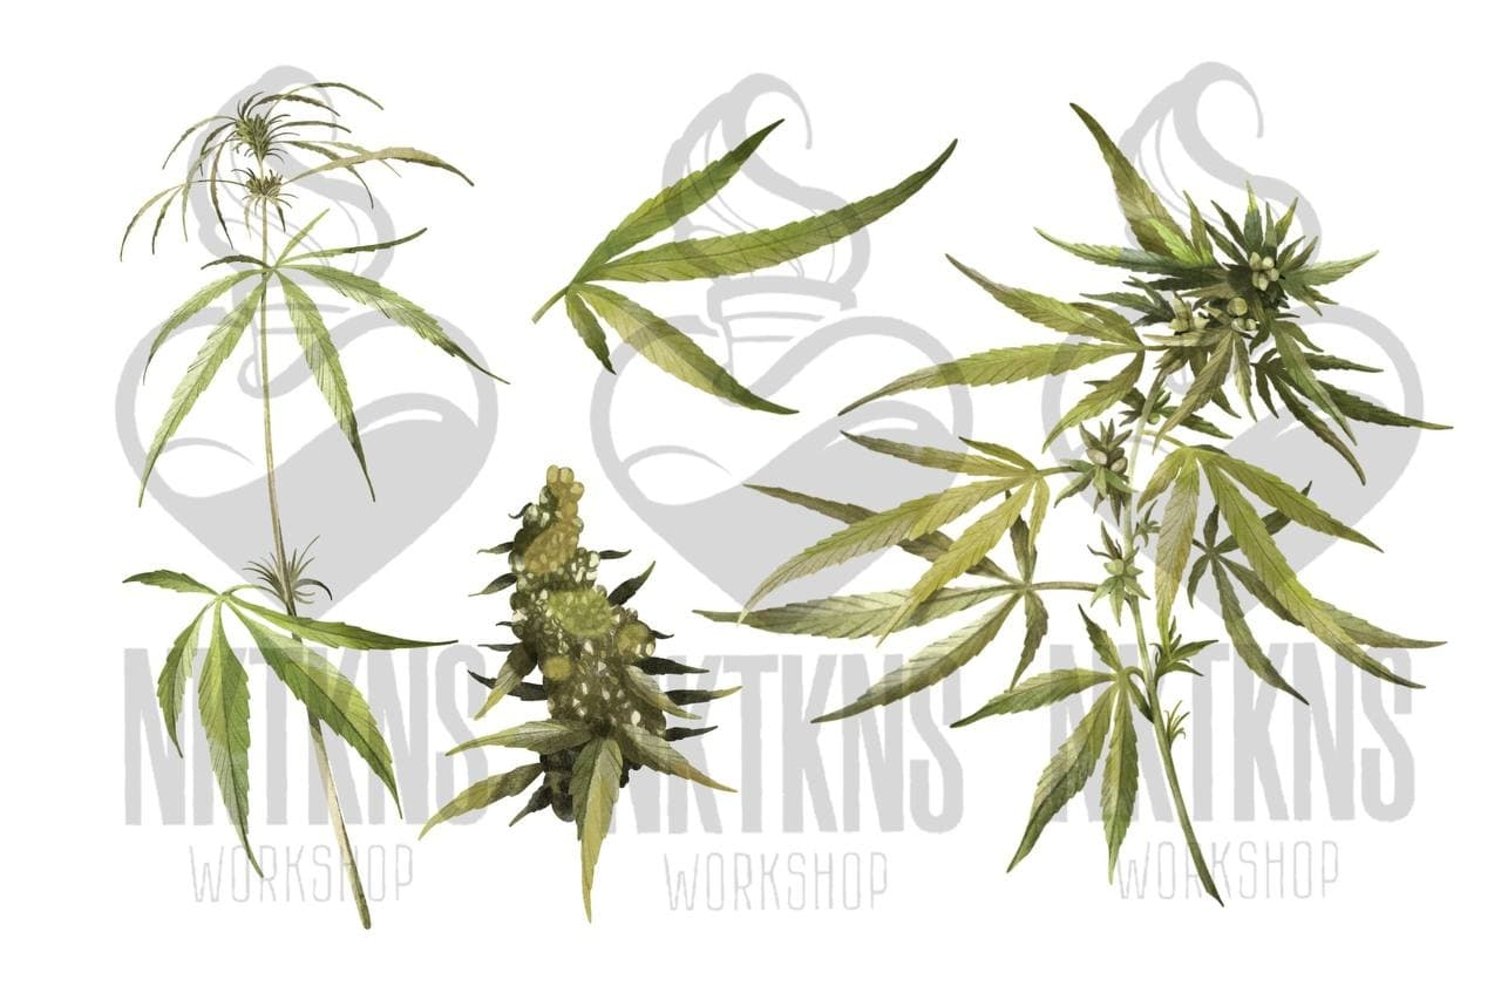 Watercolor Cannabis Created By NKTKNS WorkShop.